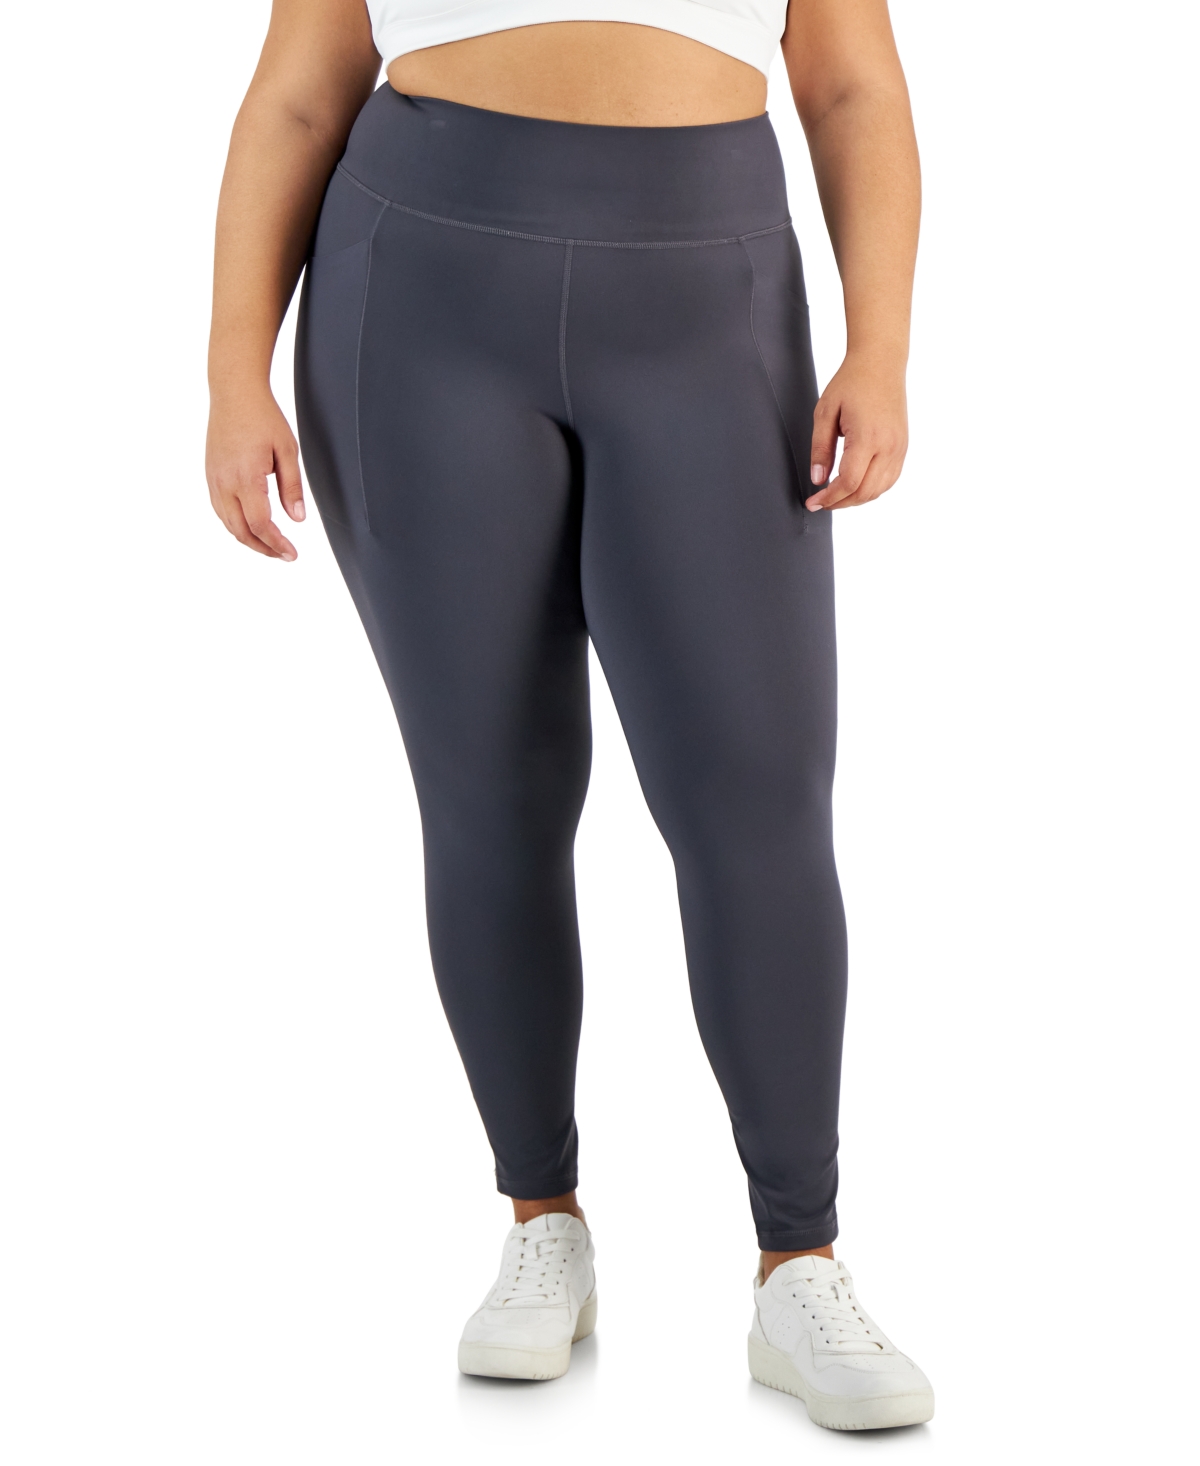 Plus Size Stretch Full-Length Leggings, Created for Macy's - Deep Charcoal